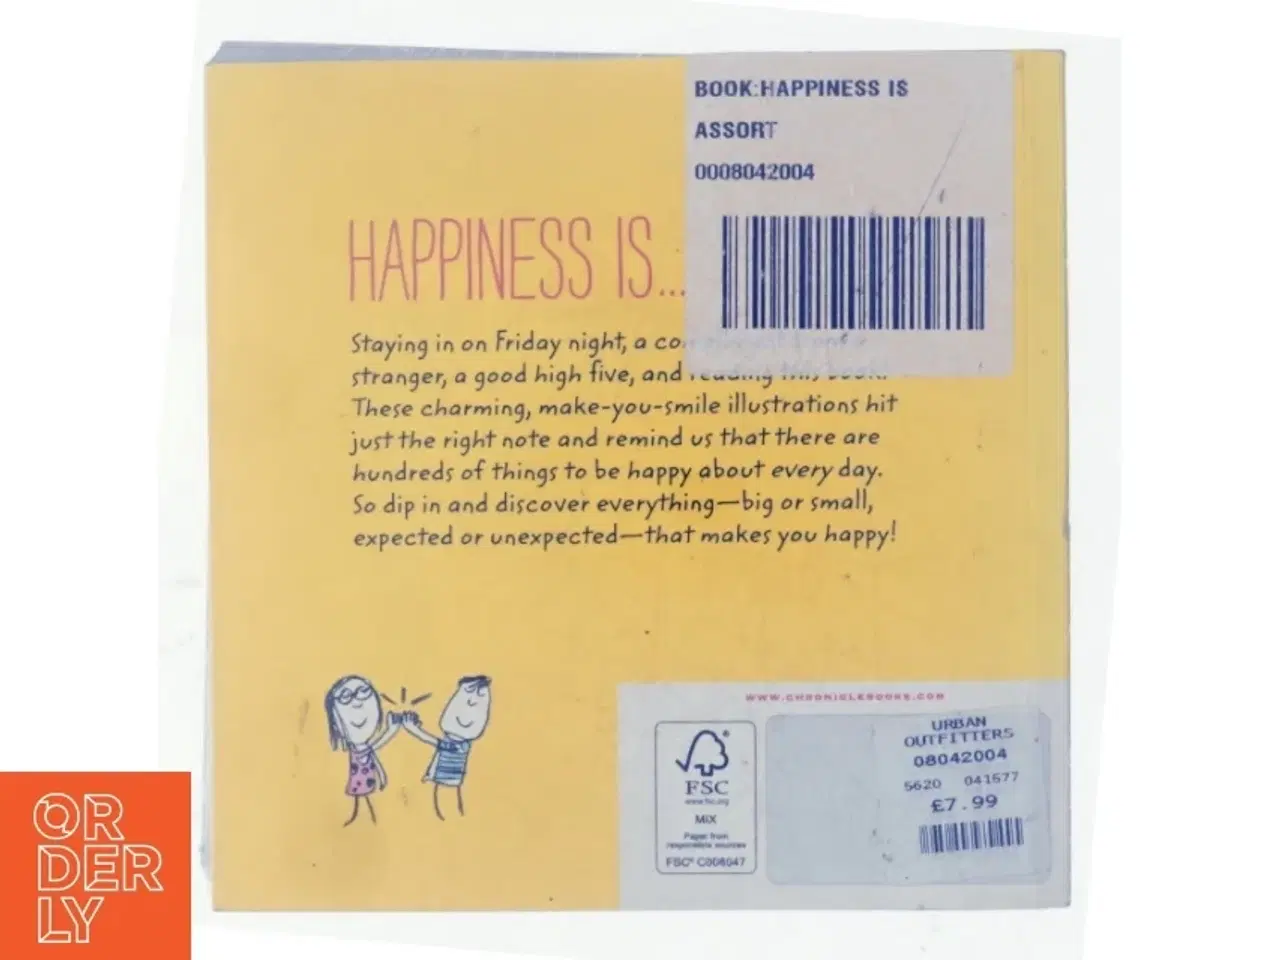 Billede 3 - Happiness is, 500 things to be happy about